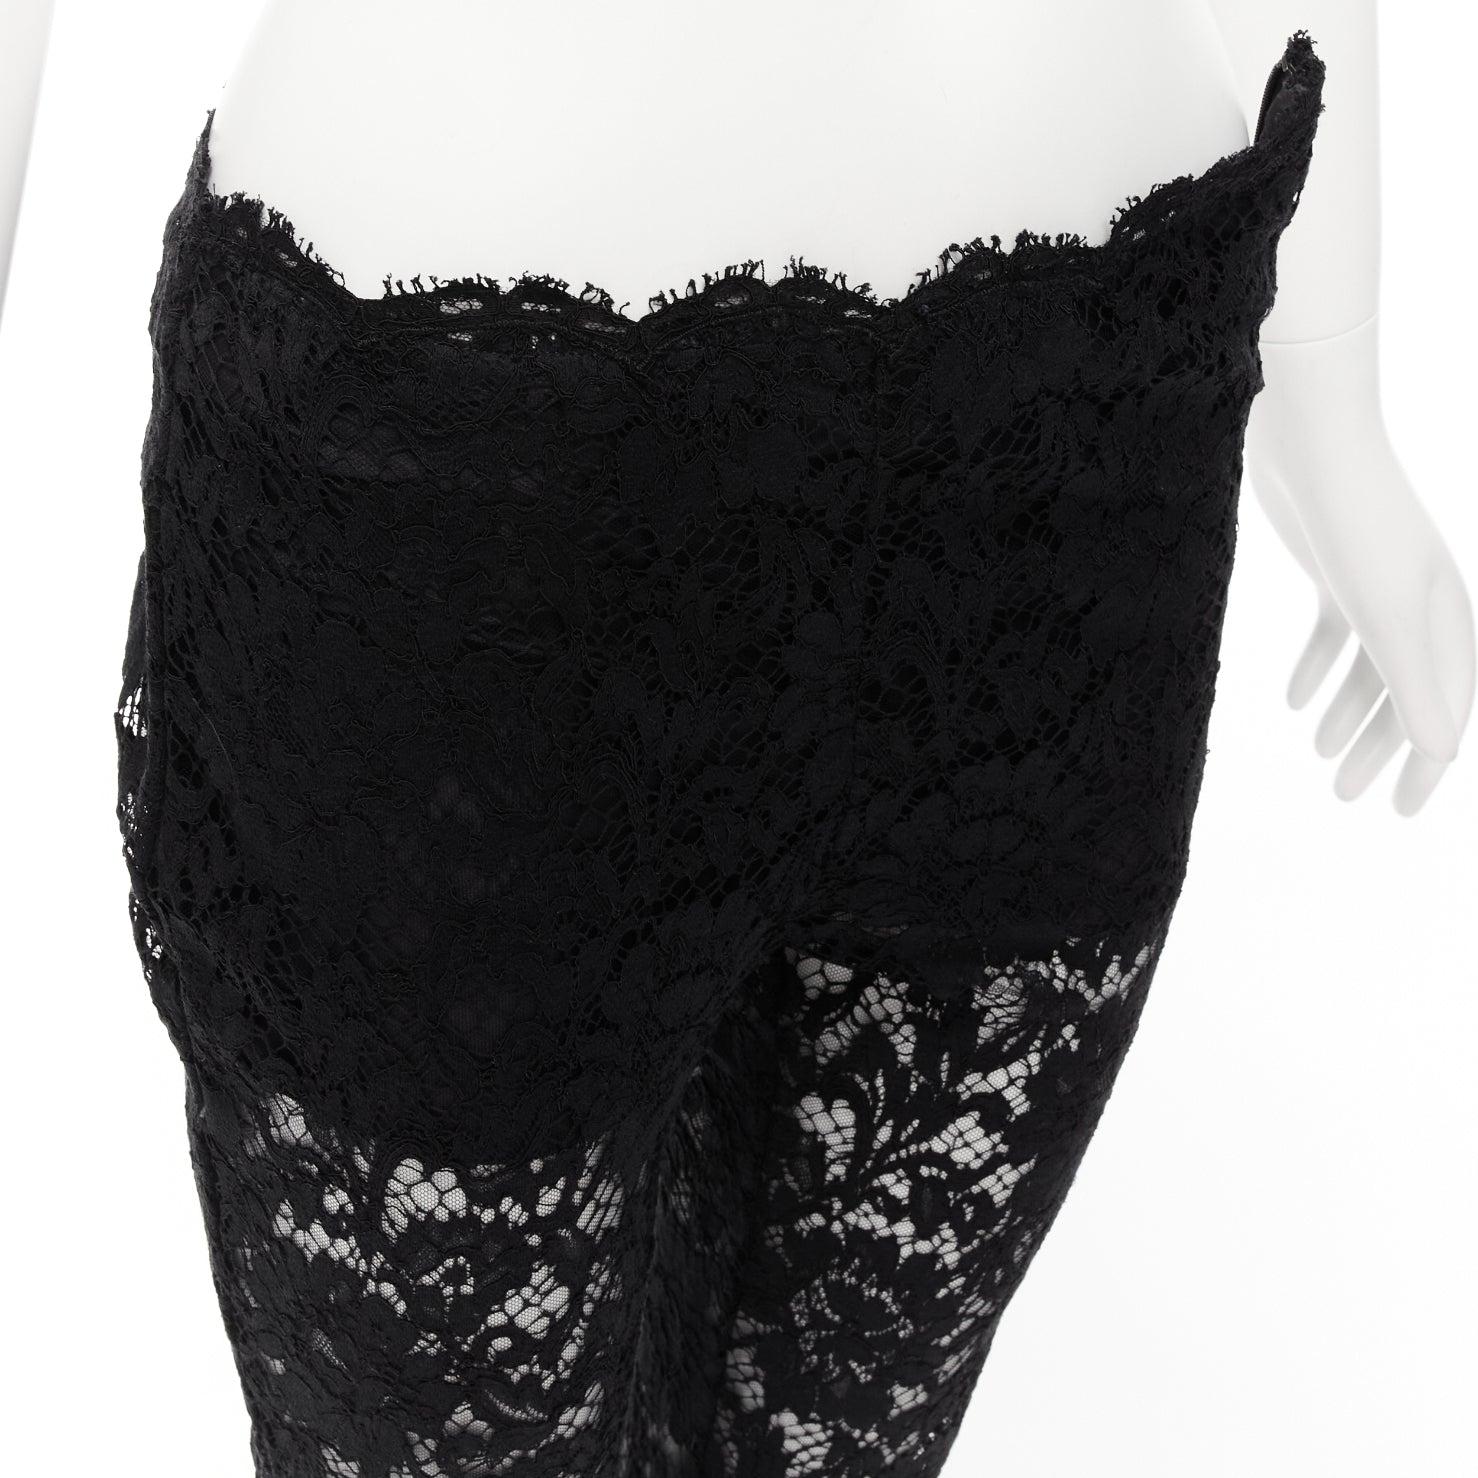 VALENTINO black cotton blend floral lace overlay sheer cropped pants IT38 XS
Reference: LNKO/A02326
Brand: Valentino
Designer: Pier Paolo Piccioli
Material: Cotton, Blend
Color: Black
Pattern: Lace
Closure: Zip
Lining: Black Fabric
Made in: